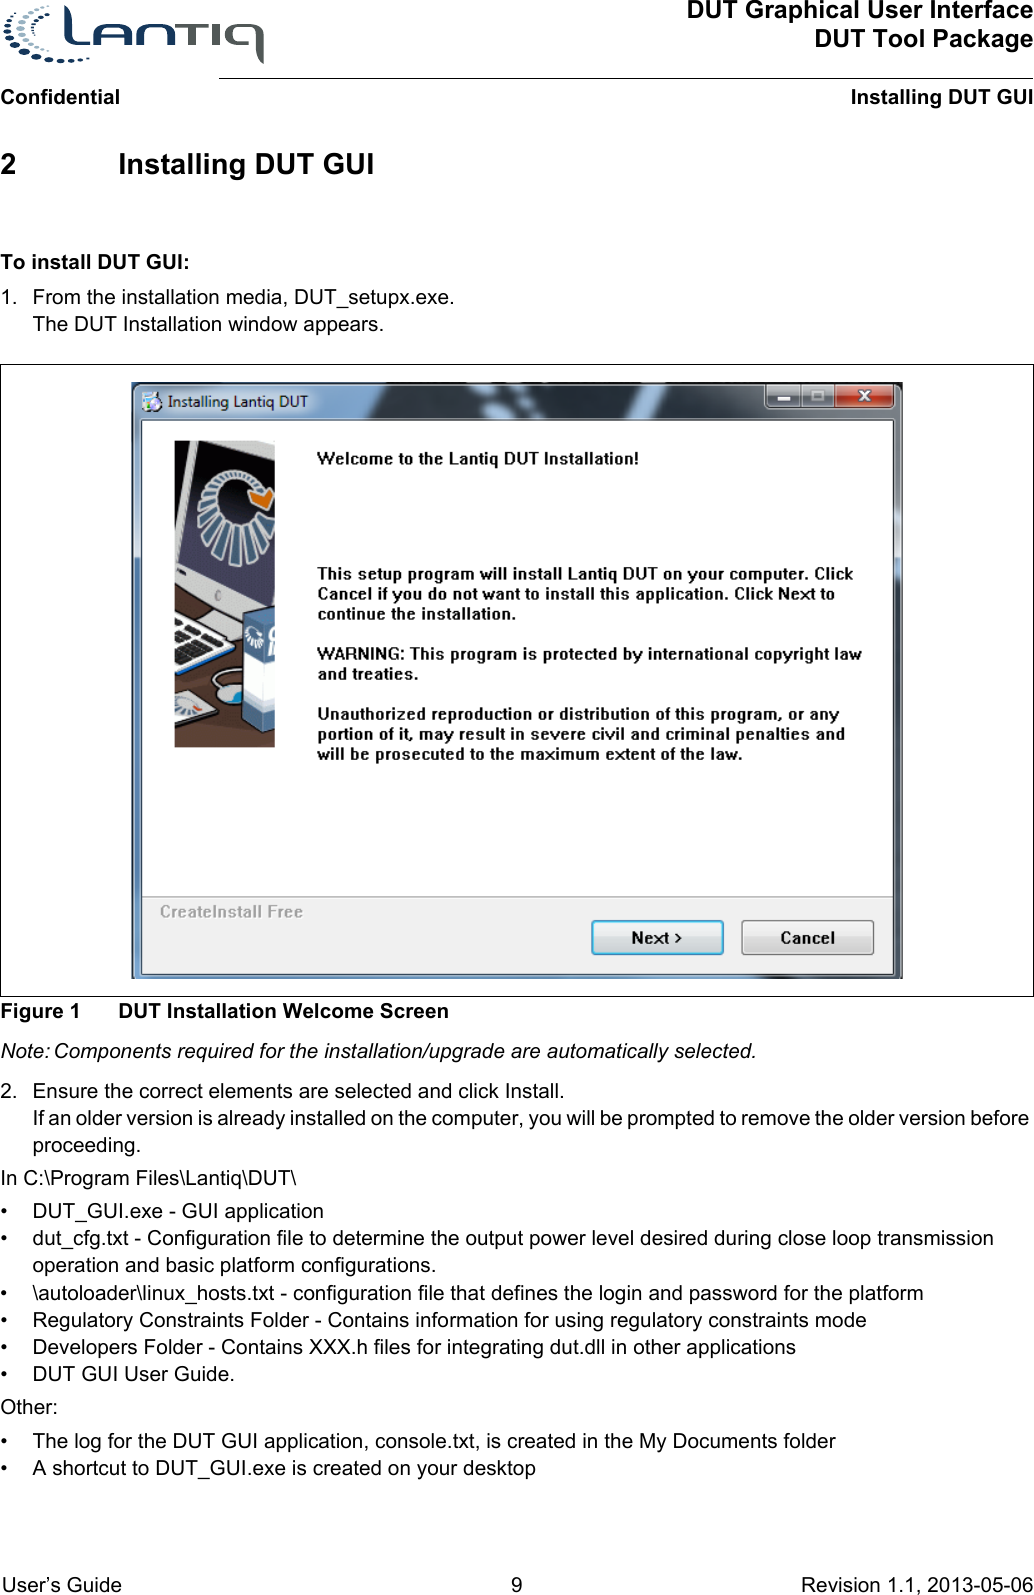 DUT Graphical User InterfaceDUT Tool PackageInstalling DUT GUIConfidential User’s Guide 9 Revision 1.1, 2013-05-06      2 Installing DUT GUITo install DUT GUI:1. From the installation media, DUT_setupx.exe.The DUT Installation window appears.Figure 1 DUT Installation Welcome ScreenNote: Components required for the installation/upgrade are automatically selected.2. Ensure the correct elements are selected and click Install.If an older version is already installed on the computer, you will be prompted to remove the older version before proceeding.In C:\Program Files\Lantiq\DUT\• DUT_GUI.exe - GUI application• dut_cfg.txt - Configuration file to determine the output power level desired during close loop transmission operation and basic platform configurations.• \autoloader\linux_hosts.txt - configuration file that defines the login and password for the platform• Regulatory Constraints Folder - Contains information for using regulatory constraints mode• Developers Folder - Contains XXX.h files for integrating dut.dll in other applications• DUT GUI User Guide.Other:• The log for the DUT GUI application, console.txt, is created in the My Documents folder• A shortcut to DUT_GUI.exe is created on your desktop